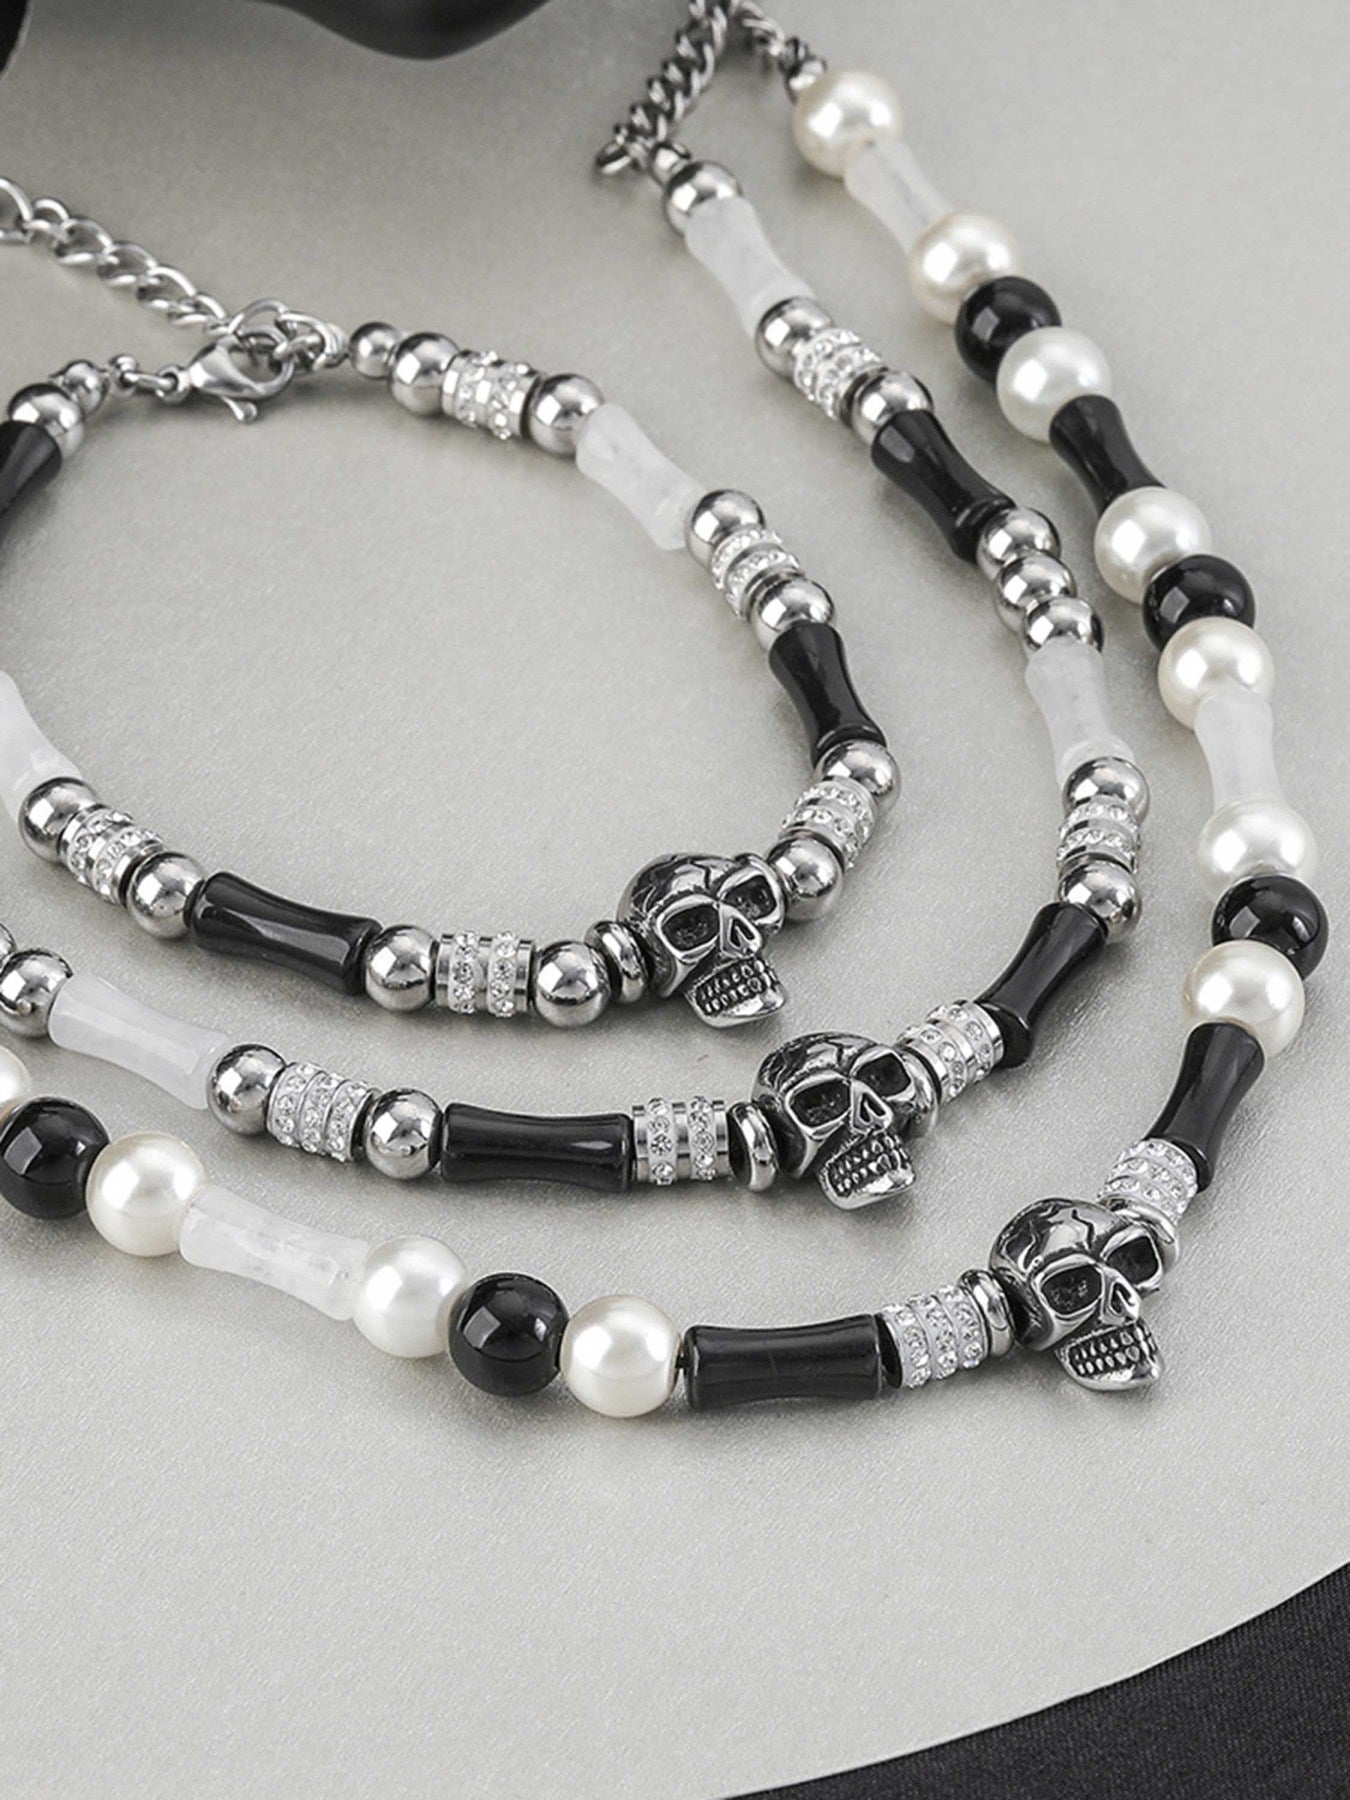 The Supermade Necklace With White Stone Beads